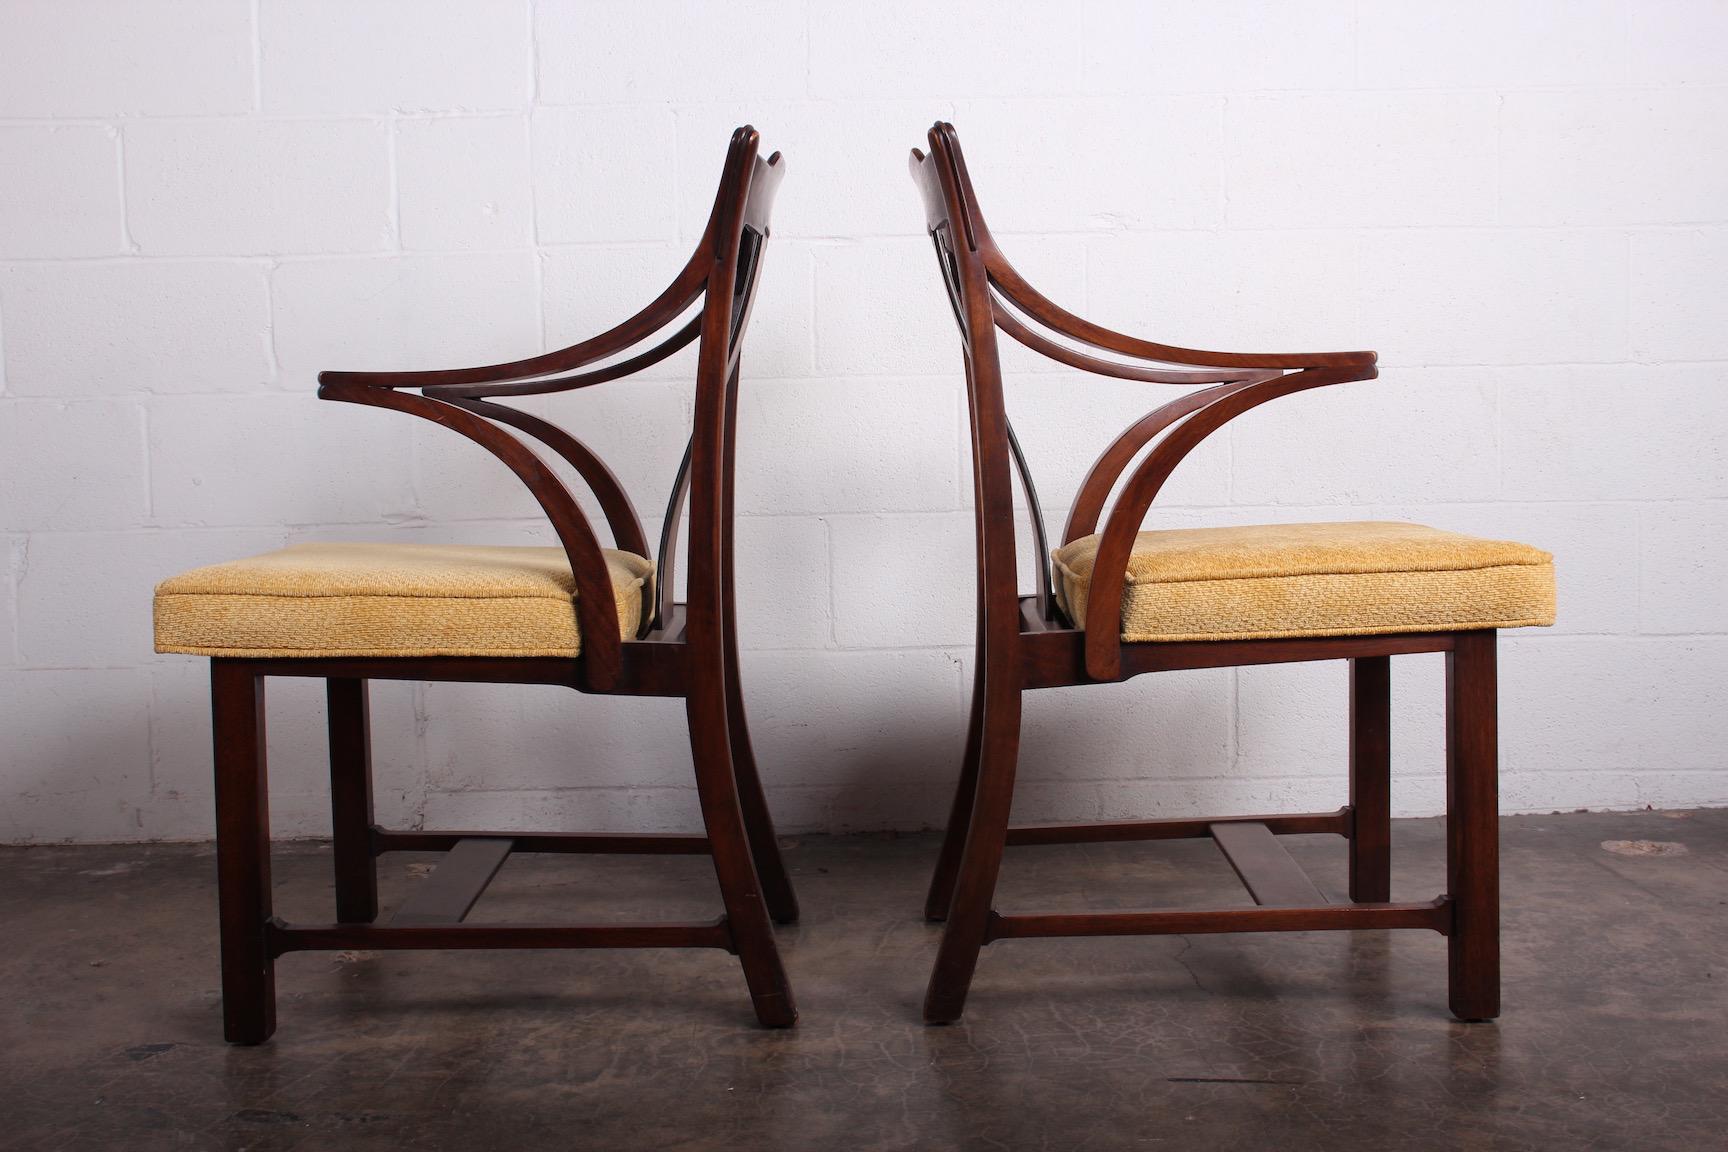 A rare pair of armchairs from the Janus collection know as the the Greene & Greene chairs for their crafted appearance. Designed by Edward Wormley for Dunbar.